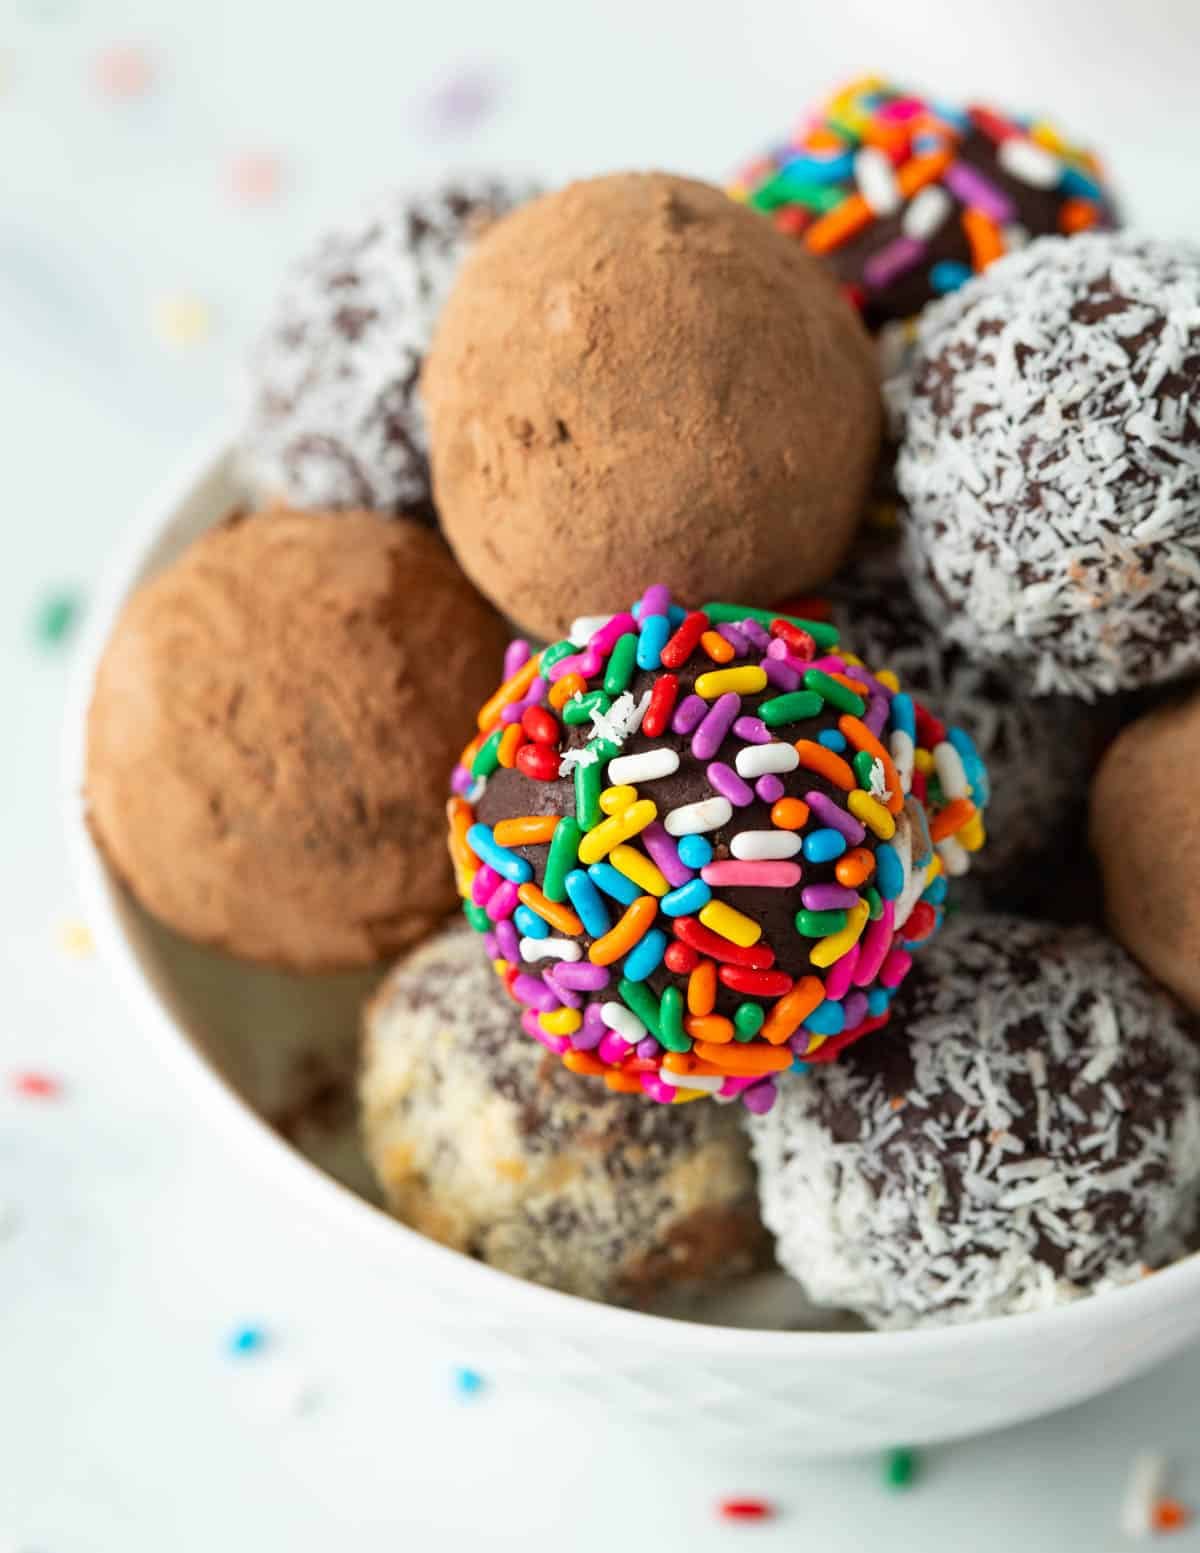 Vegan chocolate truffles covered in assorted coatings: sprinkles, coconut, cocoa powder, and nuts.